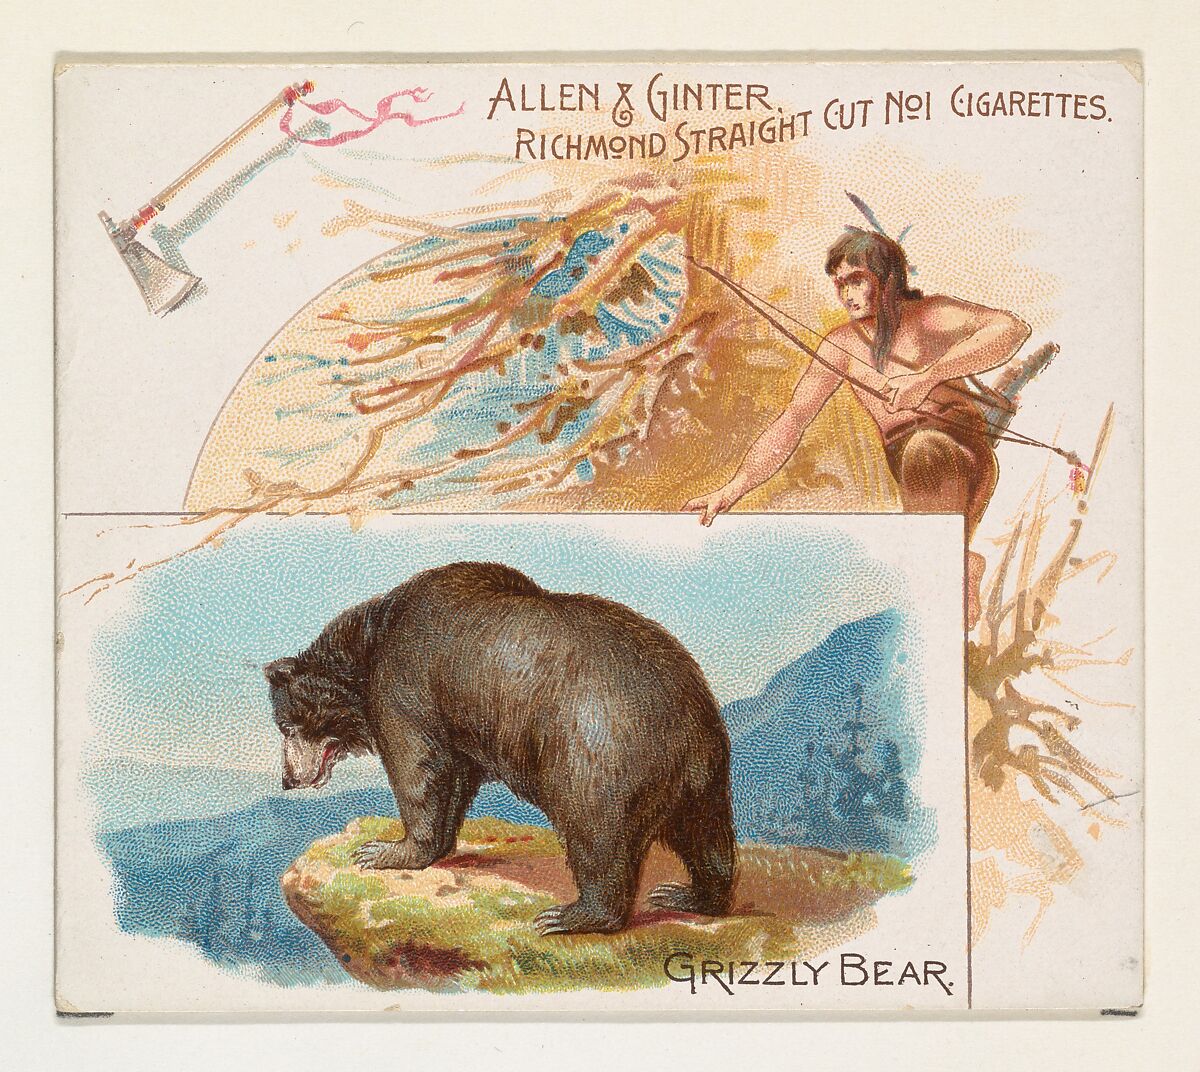 Grizzly Bear, from Quadrupeds series (N41) for Allen & Ginter Cigarettes, Issued by Allen &amp; Ginter (American, Richmond, Virginia), Commercial color lithograph 